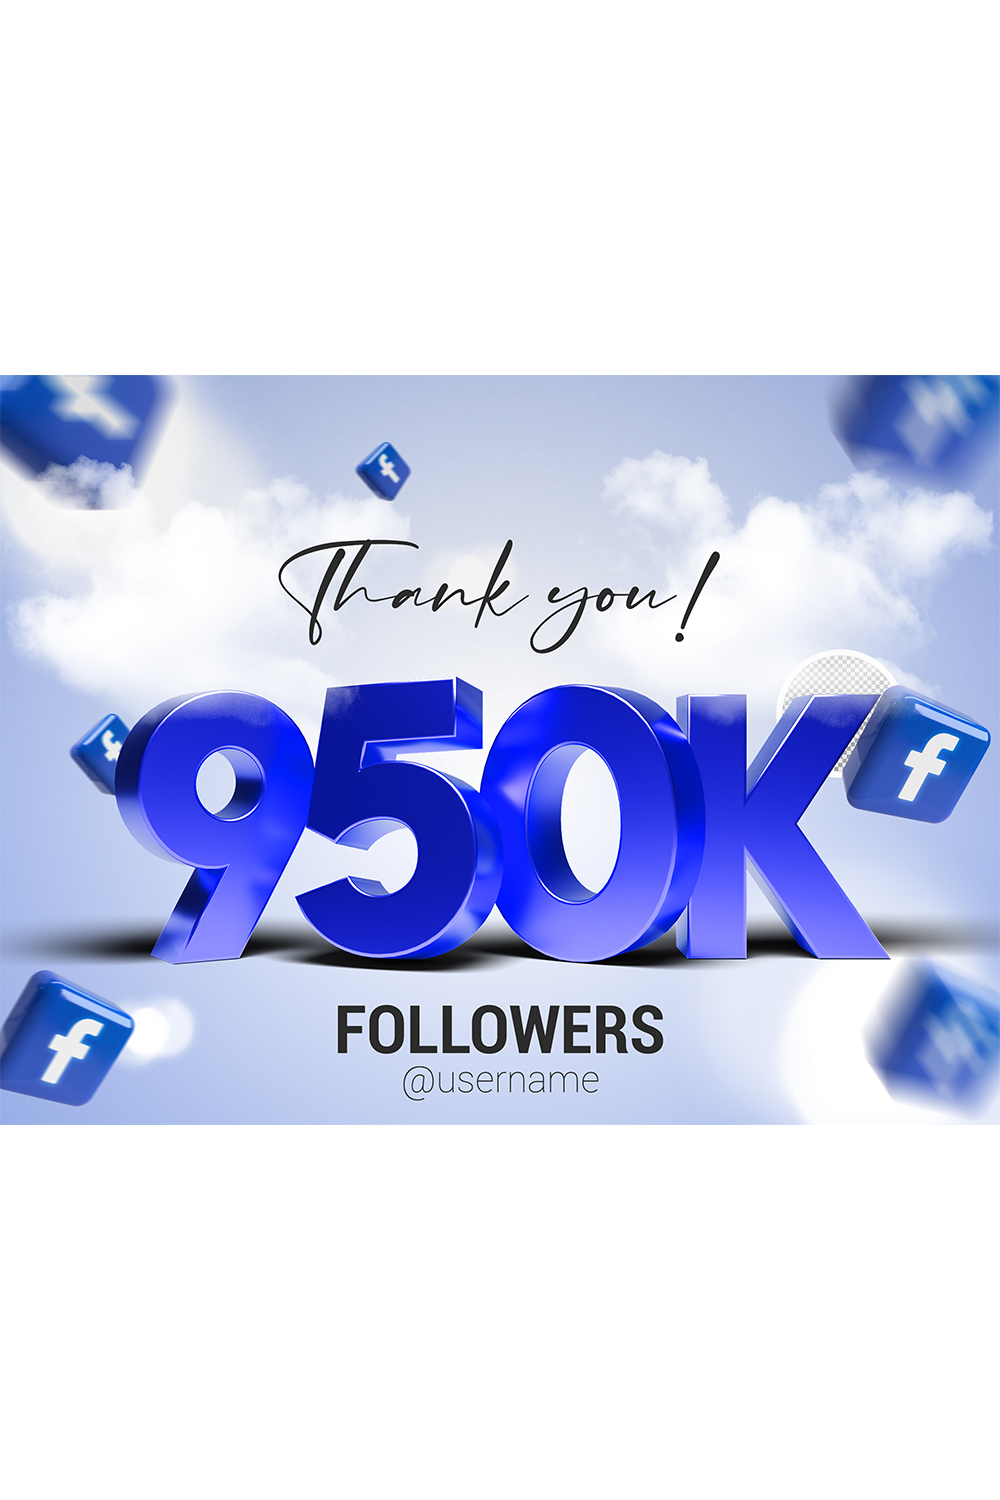 950K Followers In Facebook PSD pinterest preview image.